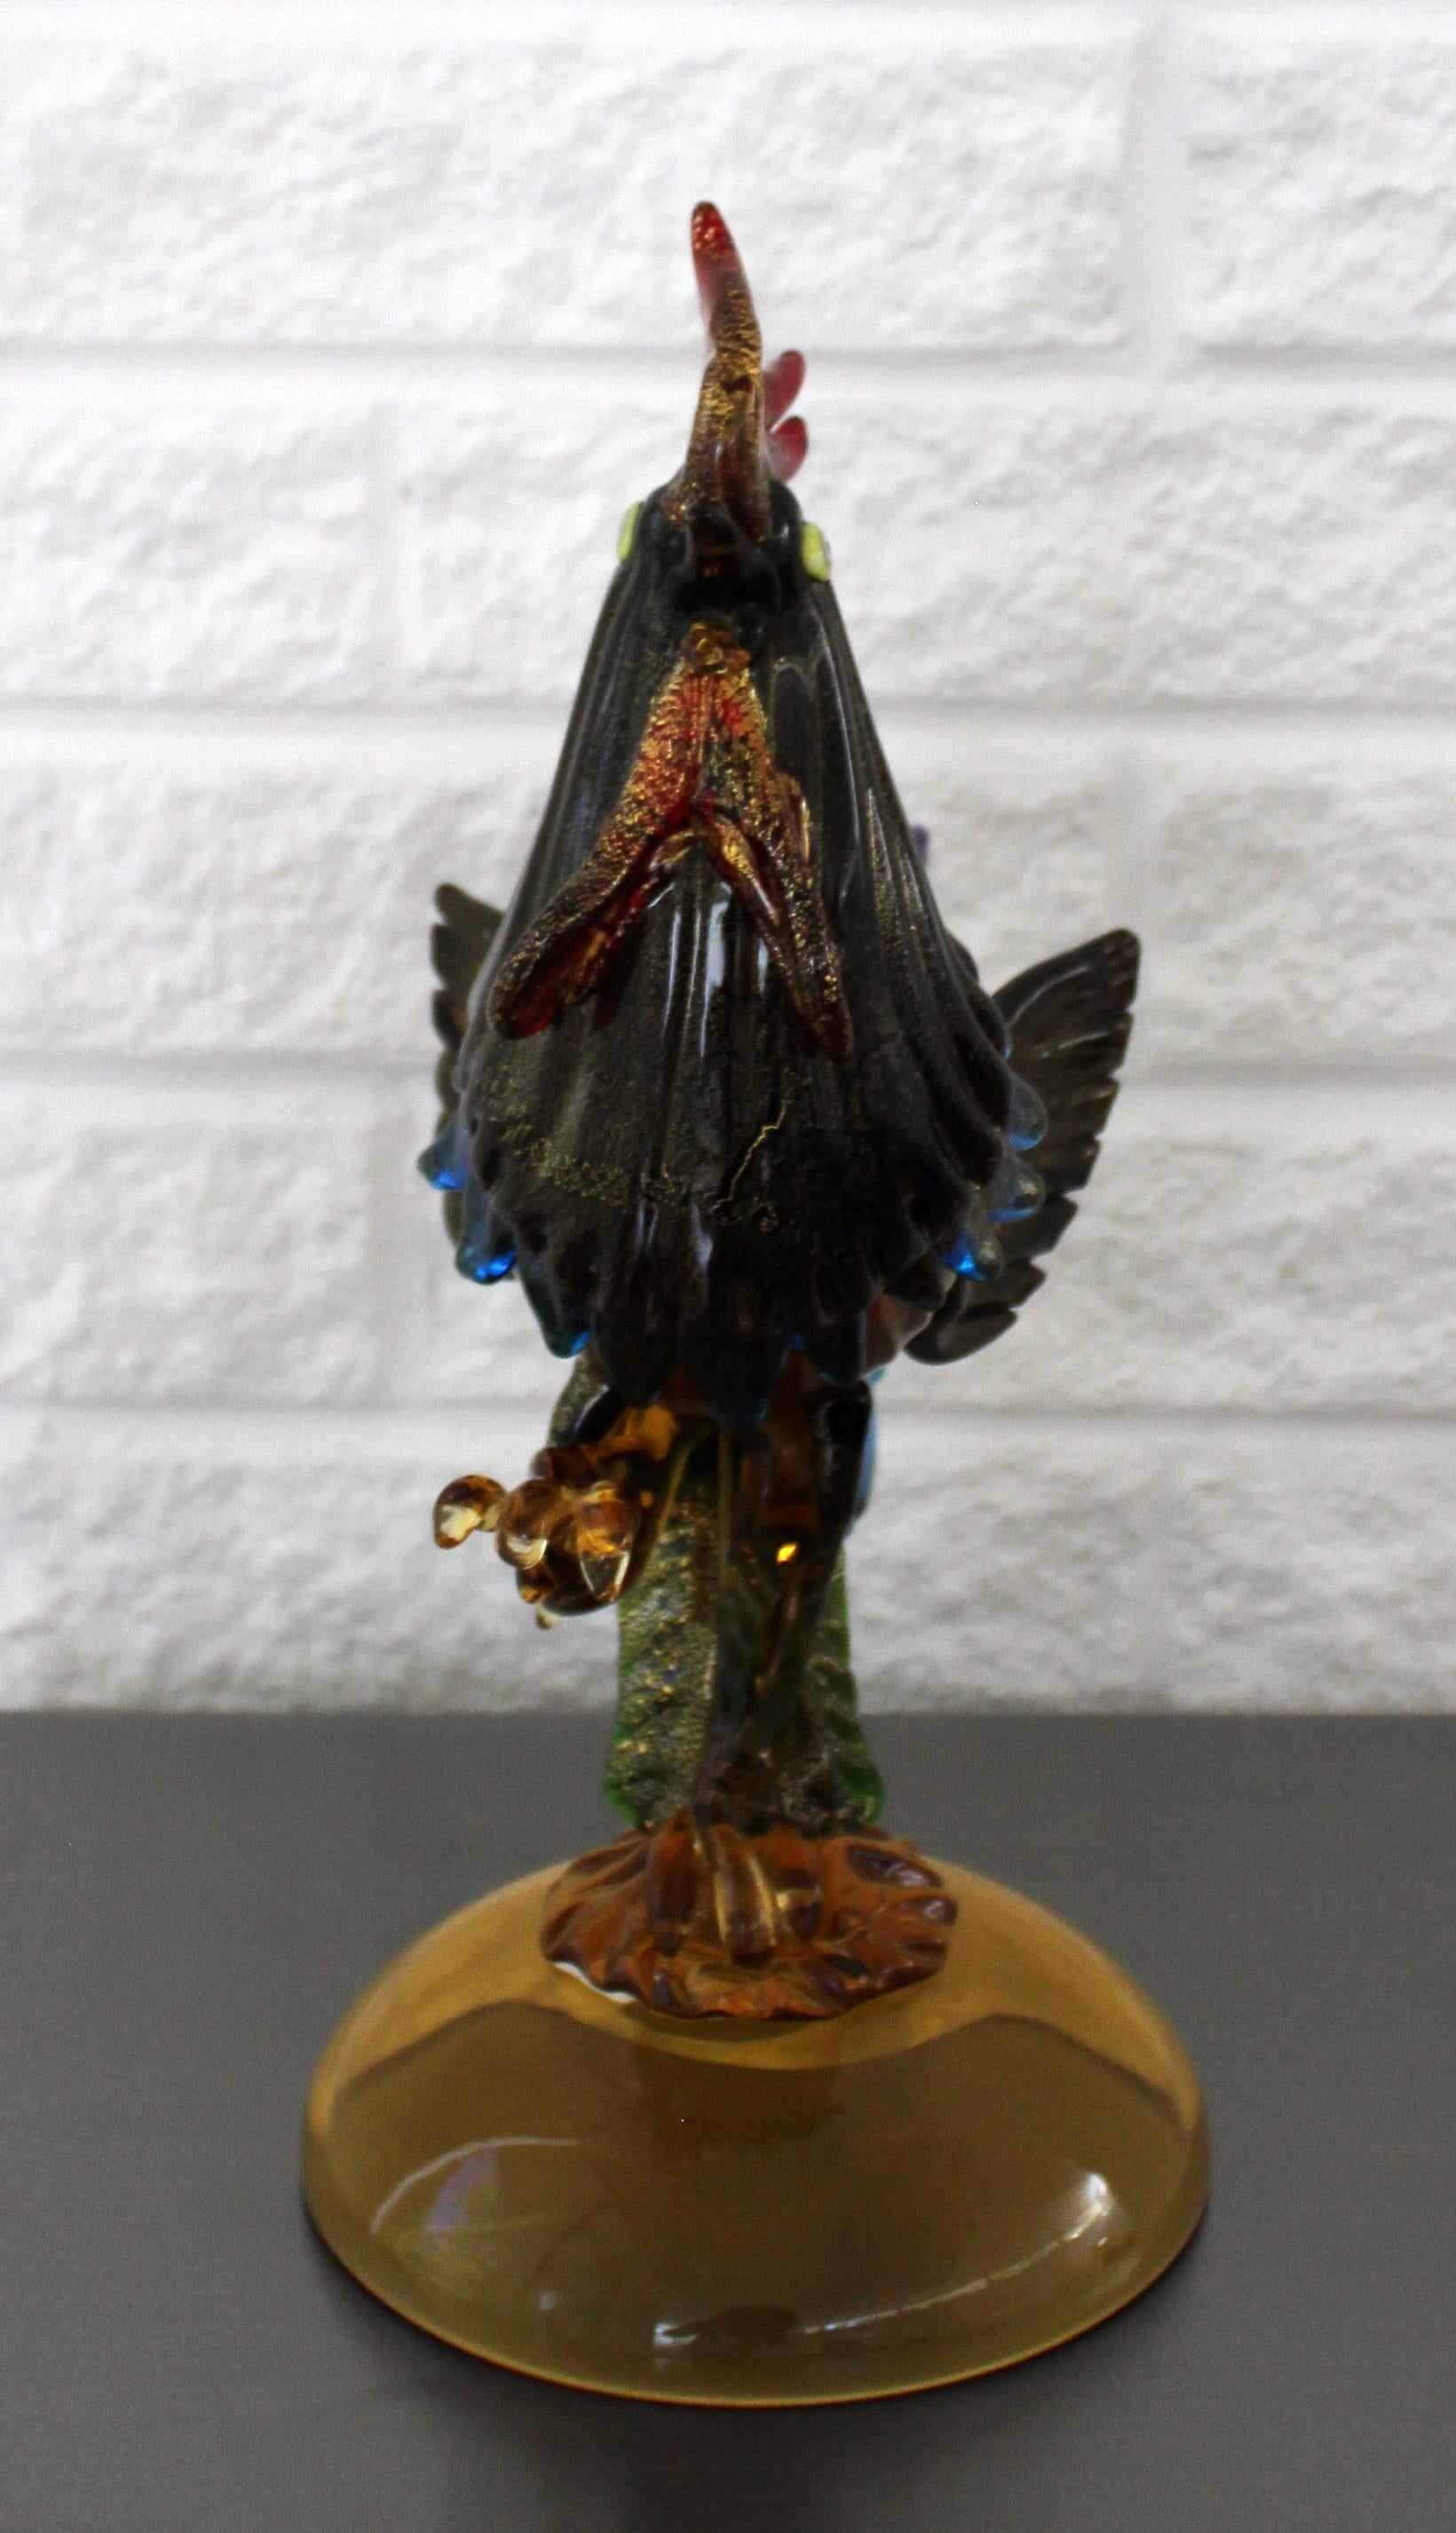 Italian Mid-Century Modern Murano Italy Glass Rooster Table Sculpture, 1950s